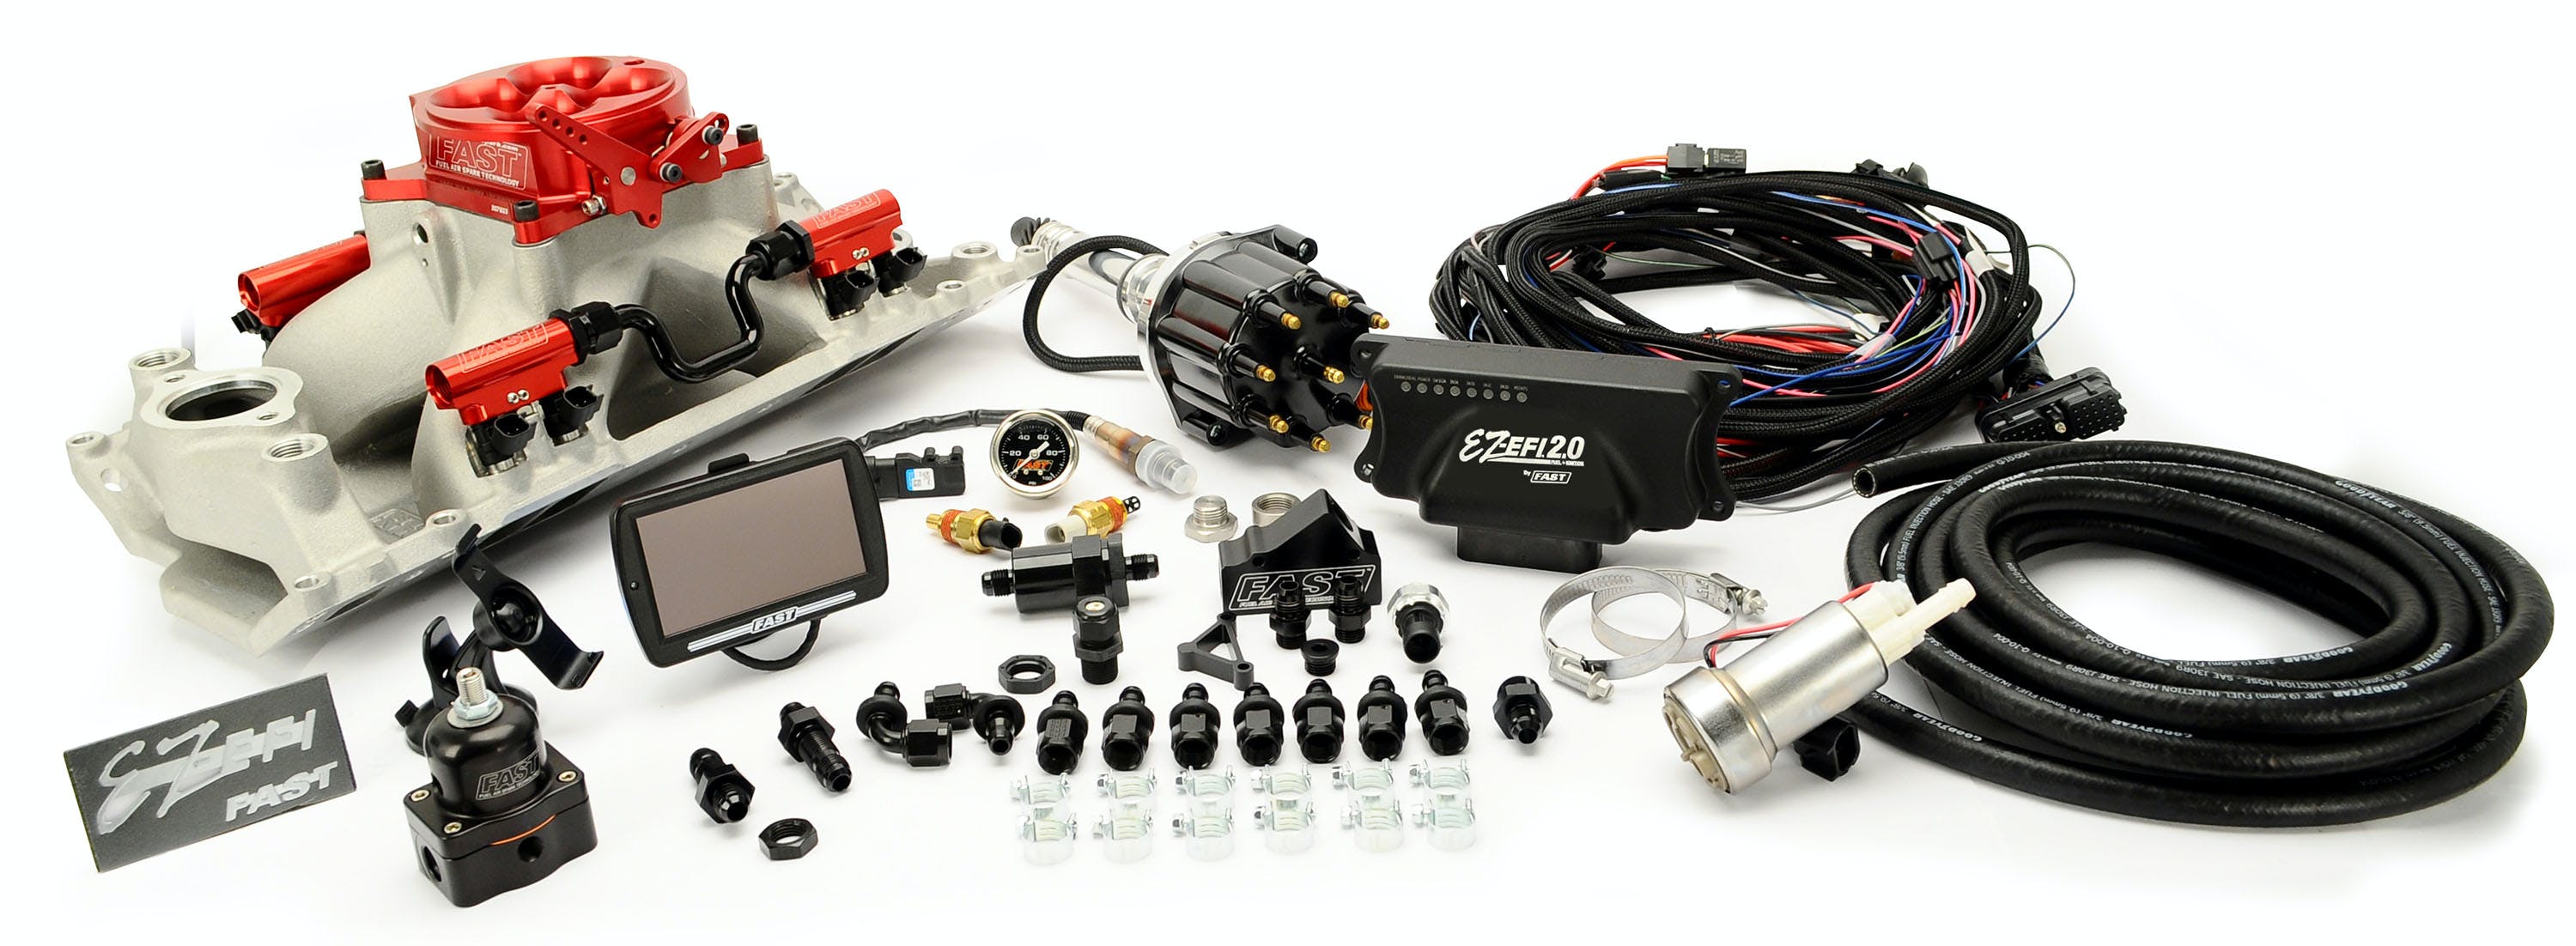 FAST - Fuel Air Spark Technology 30411T-10L EZ 2.0 BBC Multiport kit w/intake, rails, t-body, distributor and fuel pump.